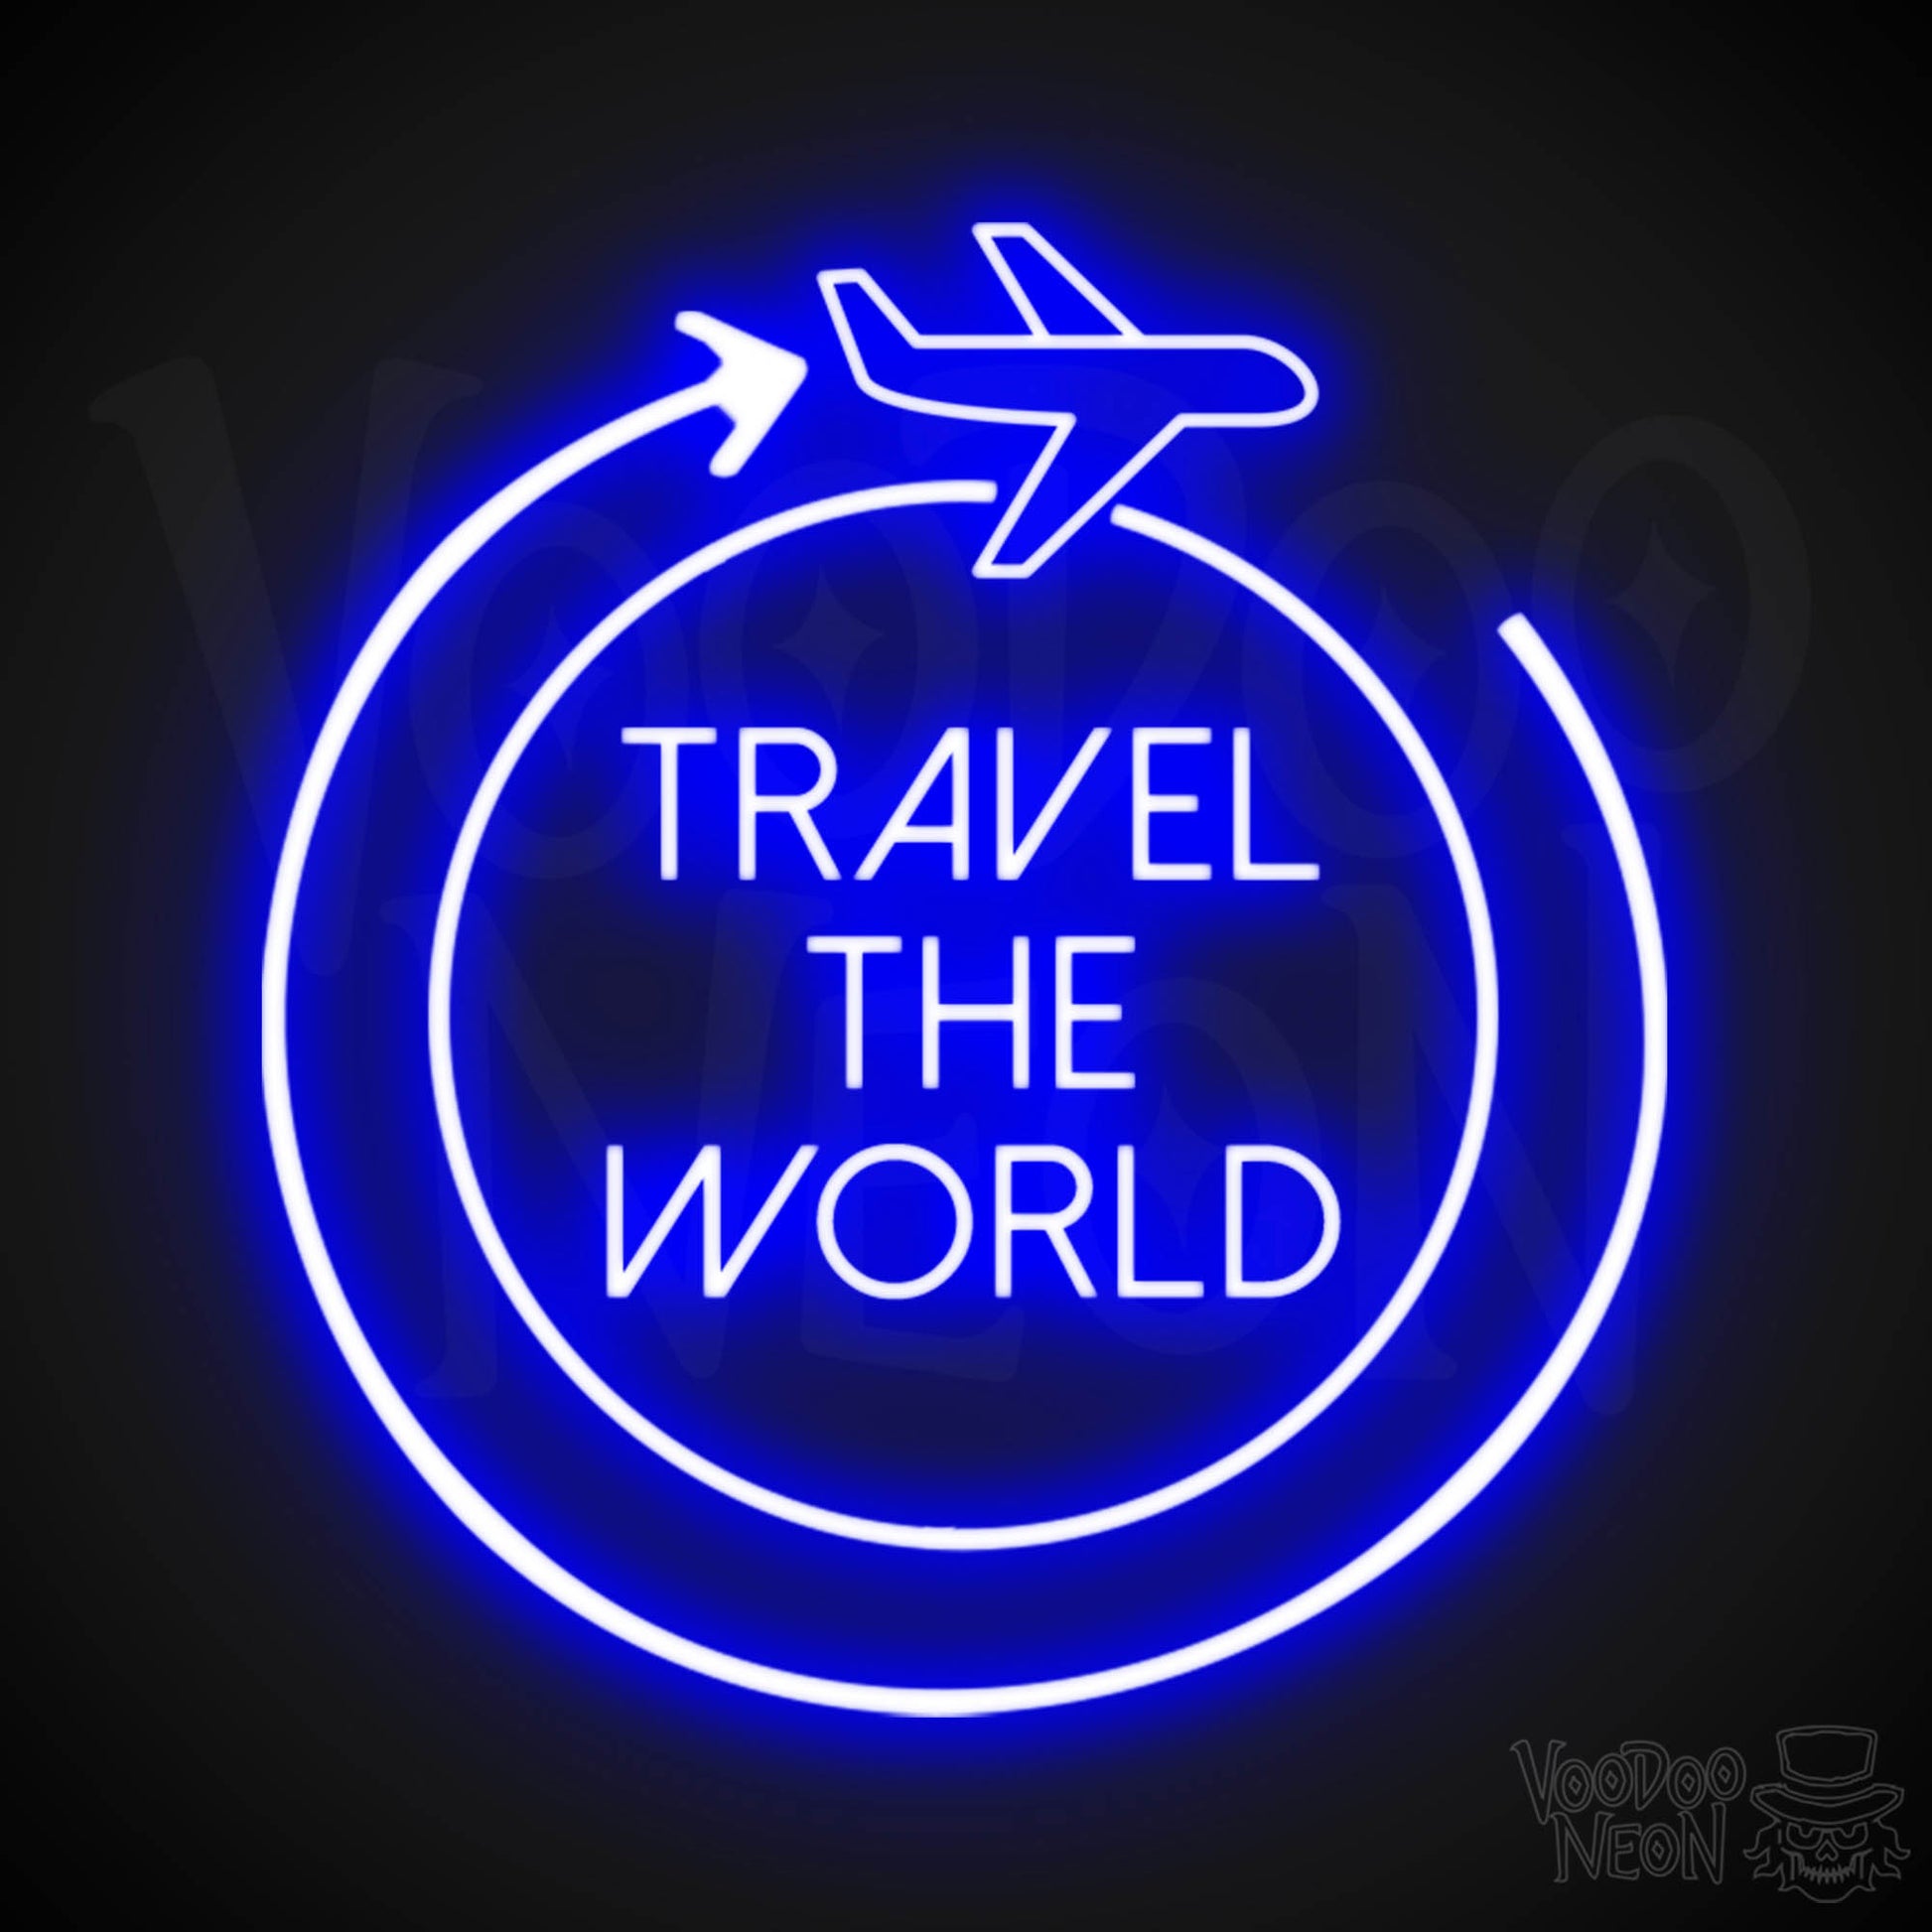 Let's Travel The World Neon Sign - LED Neon Wall Art - Color Dark Blue